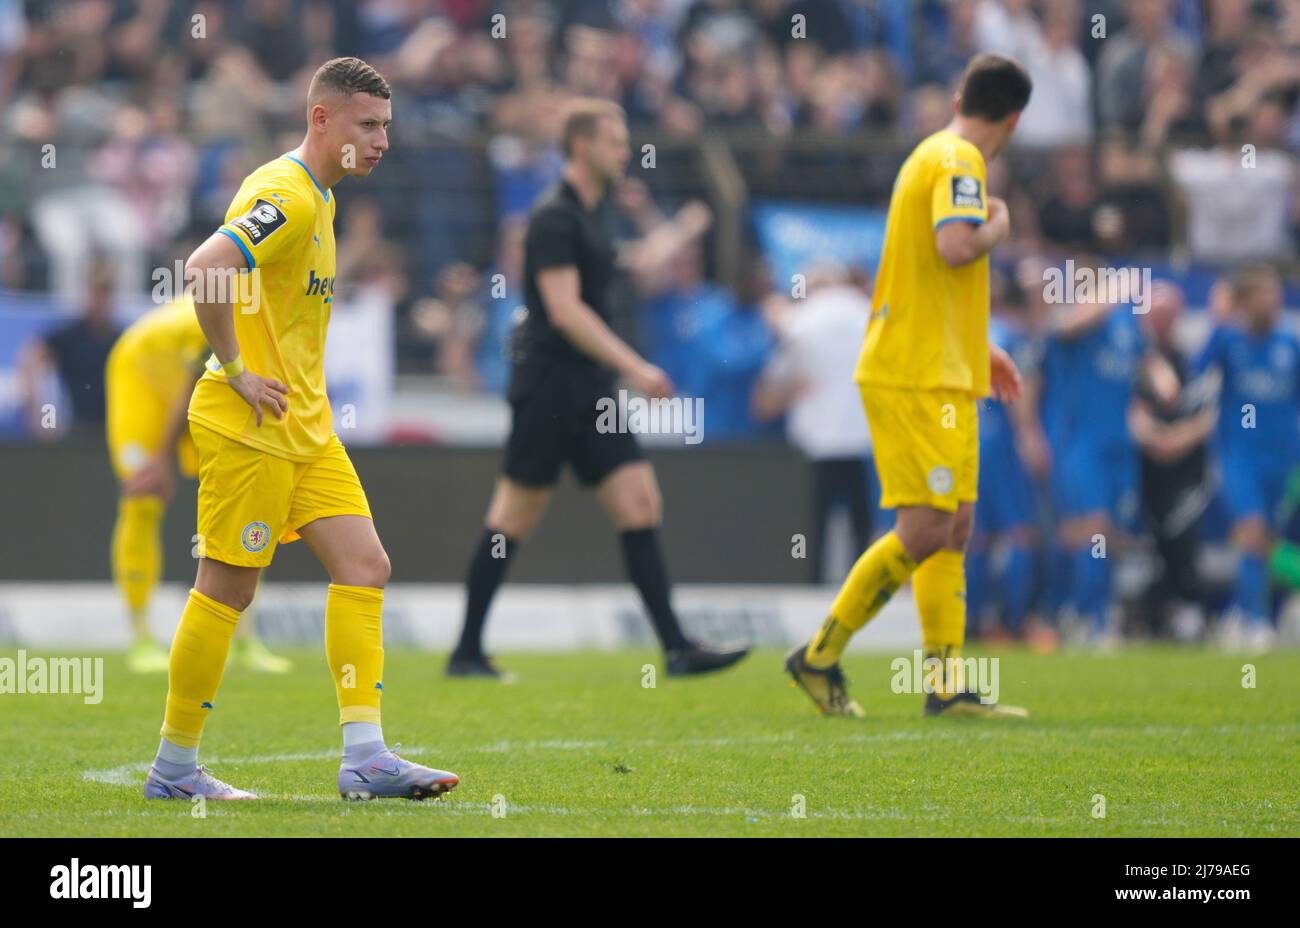 07 May 2022, Lower Saxony, Meppen: Soccer: 3rd league, SV Meppen - Eintracht Braunschweig, Hänsch-Arena. Enrique Pena Zauner (l) of Eintracht Braunschweig walks across the pitch after the 3:2. Photo: Werner Scholz/dpa - IMPORTANT NOTE: In accordance with the requirements of the DFL Deutsche Fußball Liga and the DFB Deutscher Fußball-Bund, it is prohibited to use or have used photographs taken in the stadium and/or of the match in the form of sequence pictures and/or video-like photo series. Stock Photo